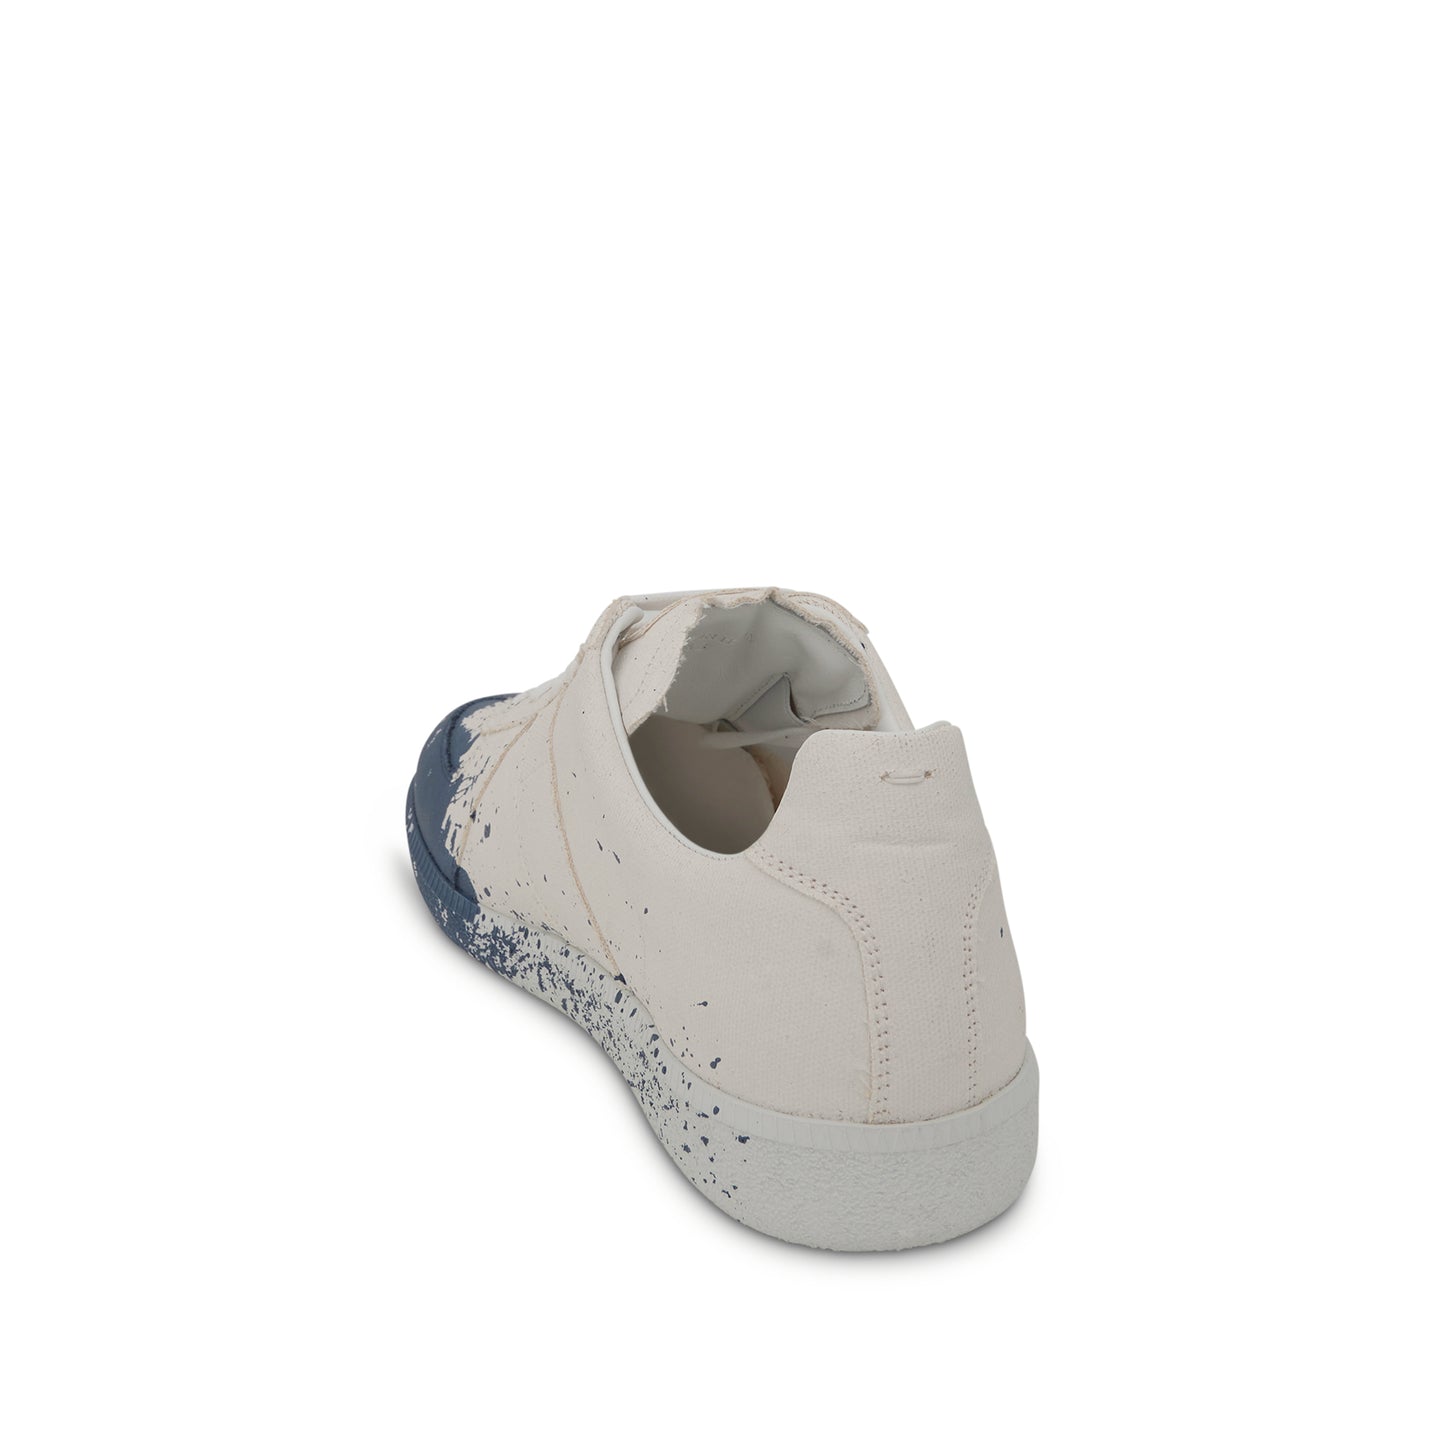 Replica Painter Low Sneakers in White/Ming